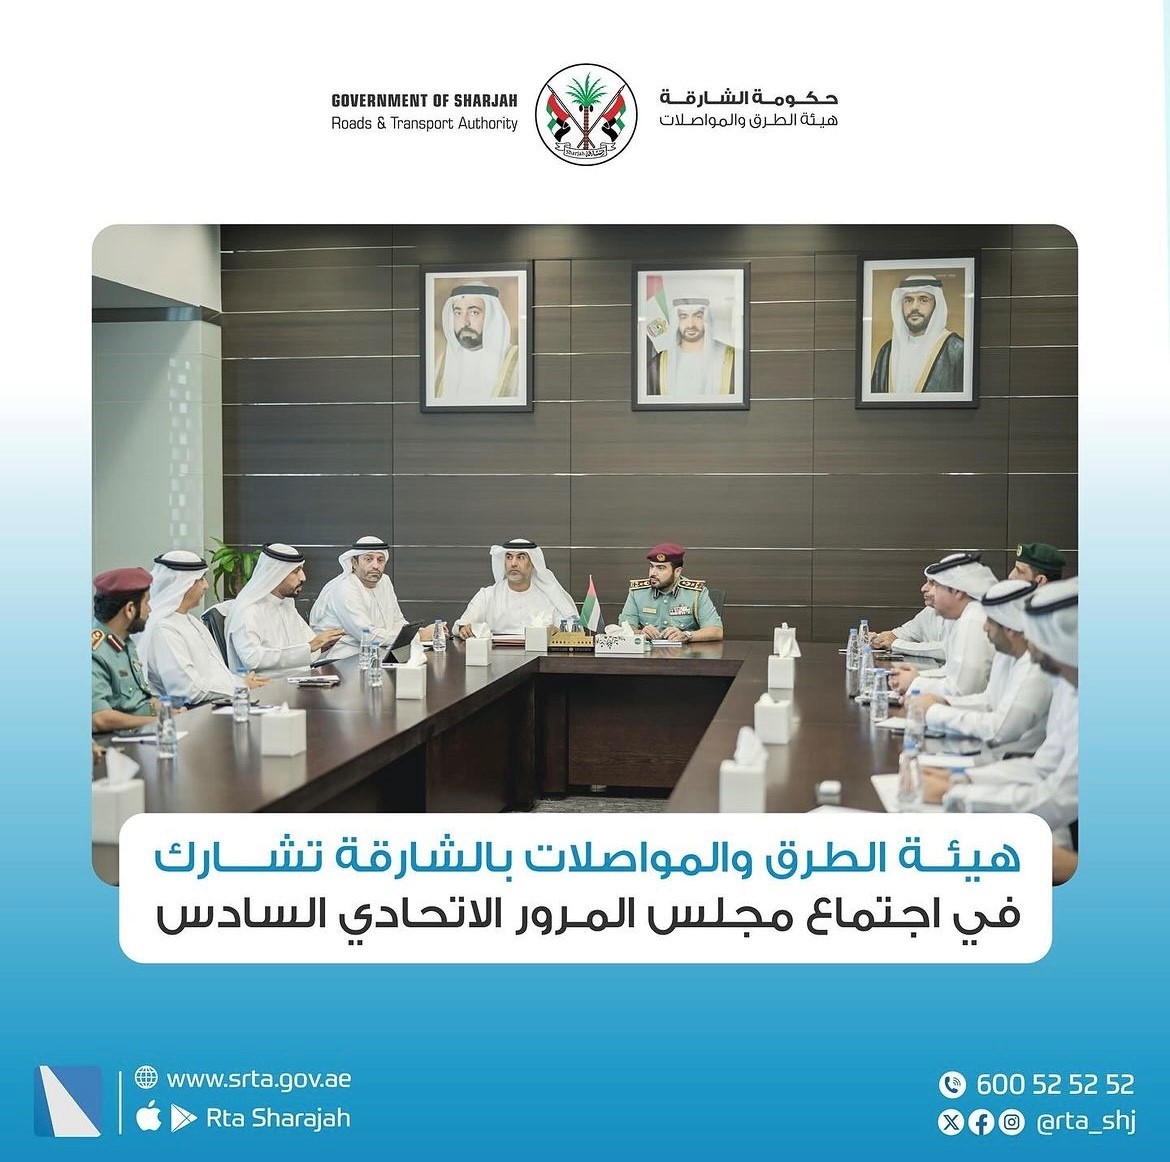 The Sharjah Roads and Transport Authority participates in the sixth Federal Traffic Council meeting